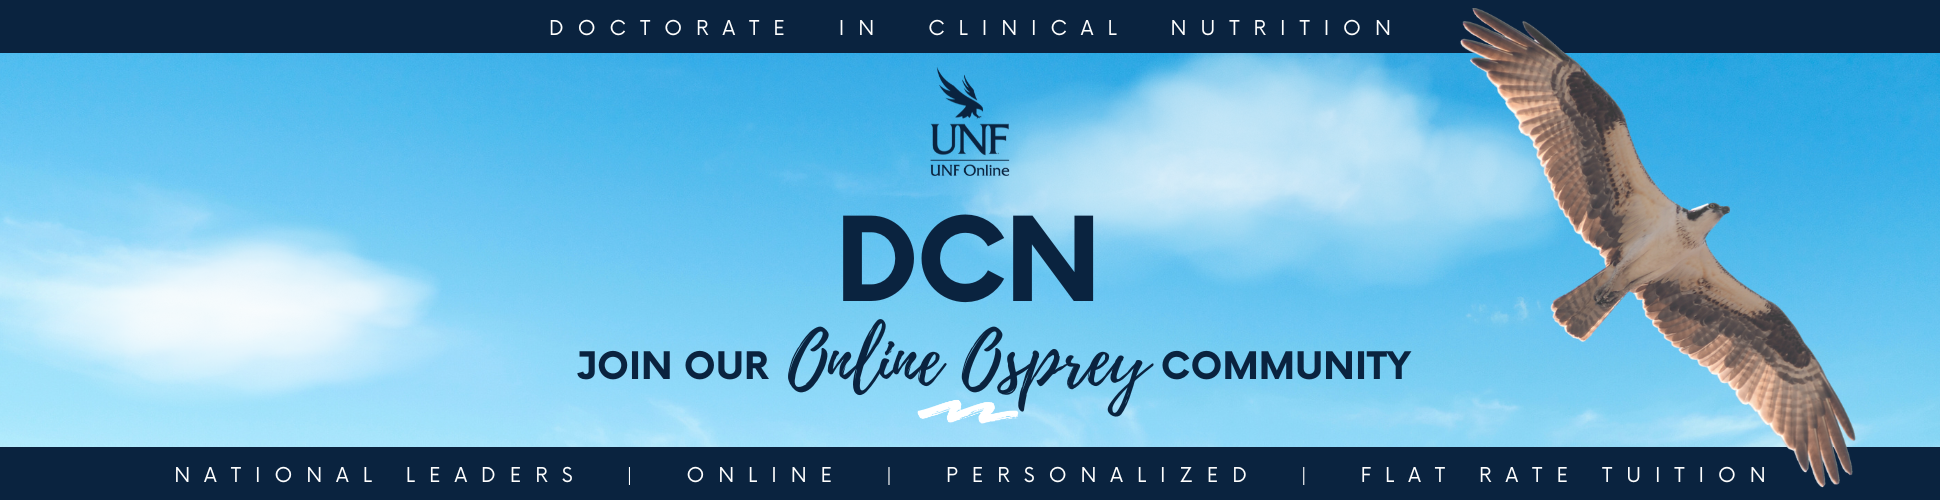 Doctorate in clinical nutrition. UNF Online Logo. Osprey bird flyer over clouds. Join our Online Osprey community. National Leaders. Online. Personlized. Flat Rate Tuition. 